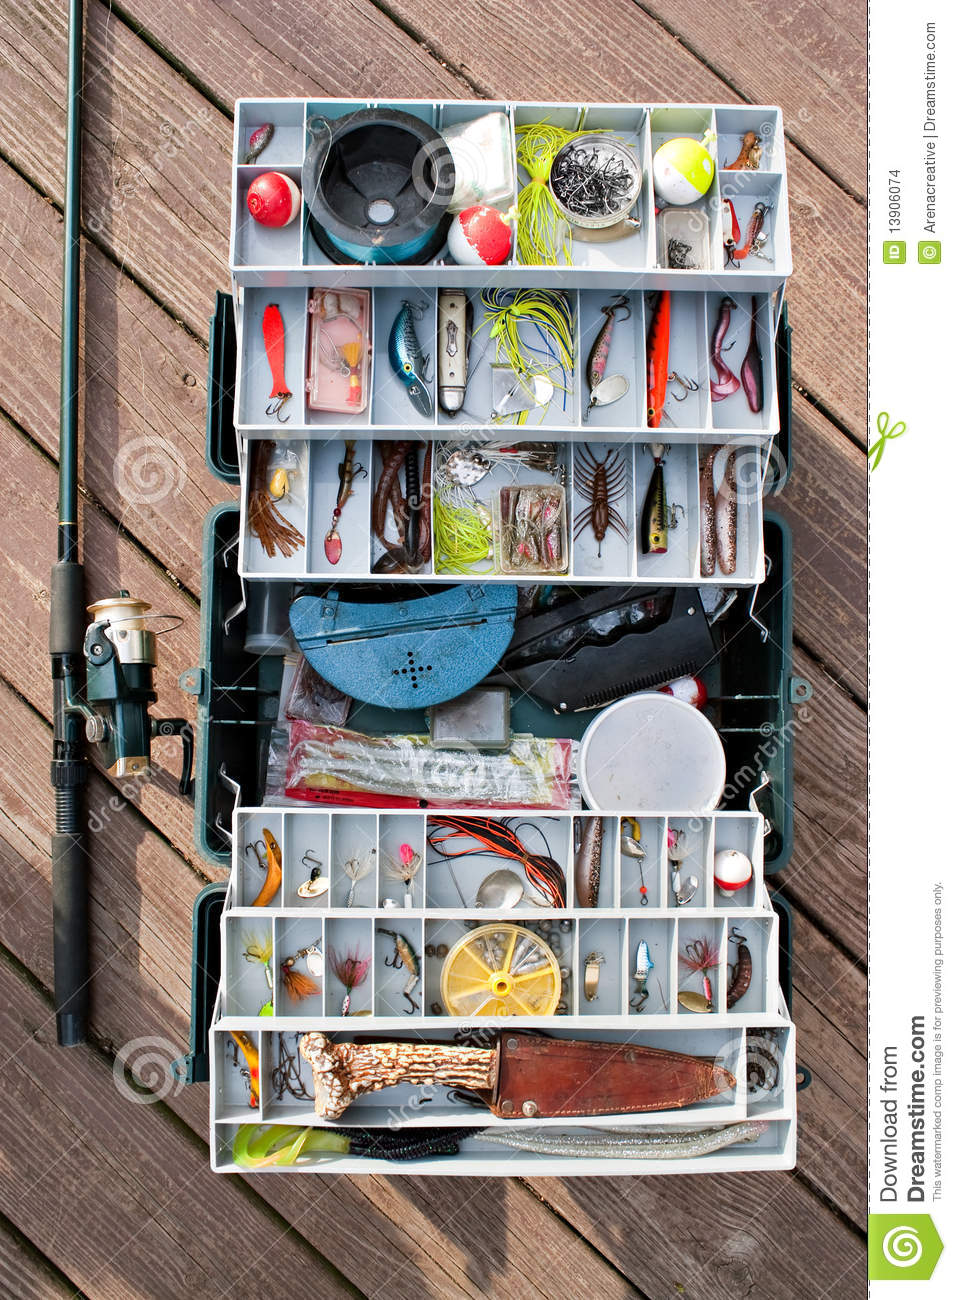     Fisherman S Tackle Box Rod And Reel Ready For A Long Day Of Fishing